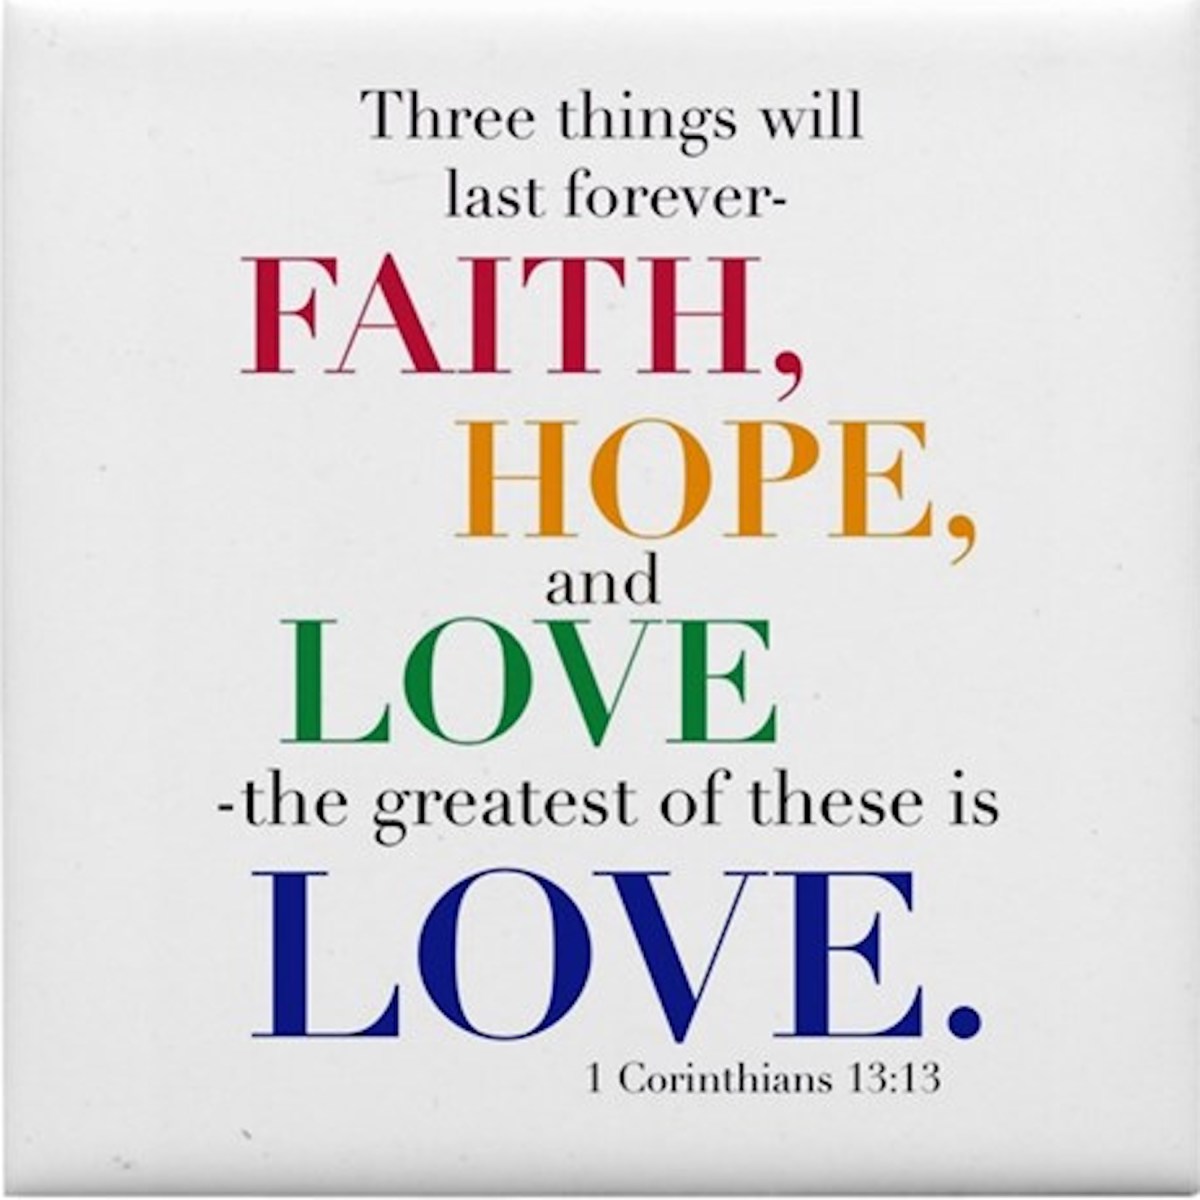 "The greatest of these is love"